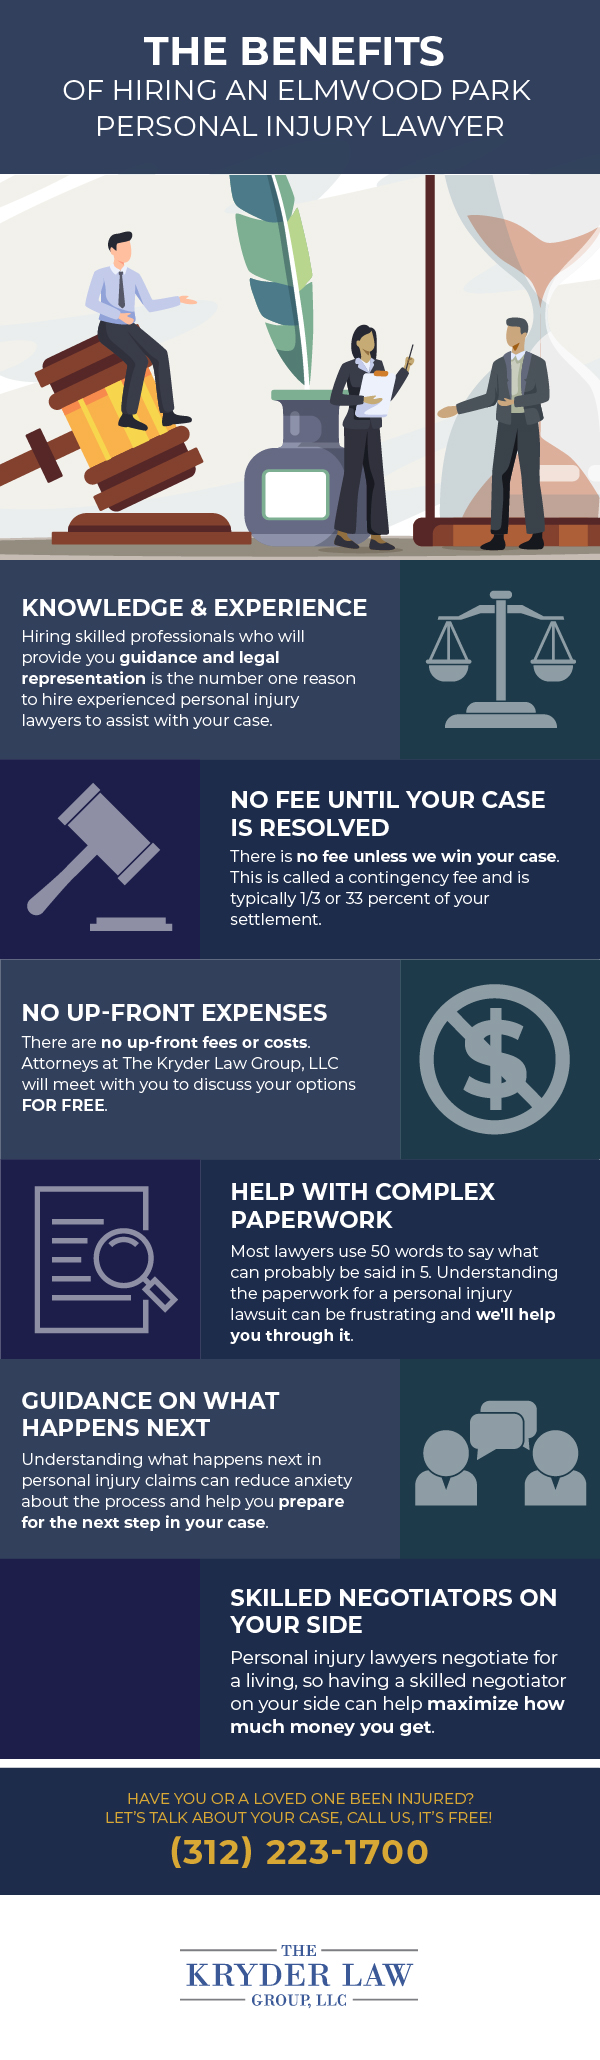 Elmwood Park Personal Injury Lawyer Infographic